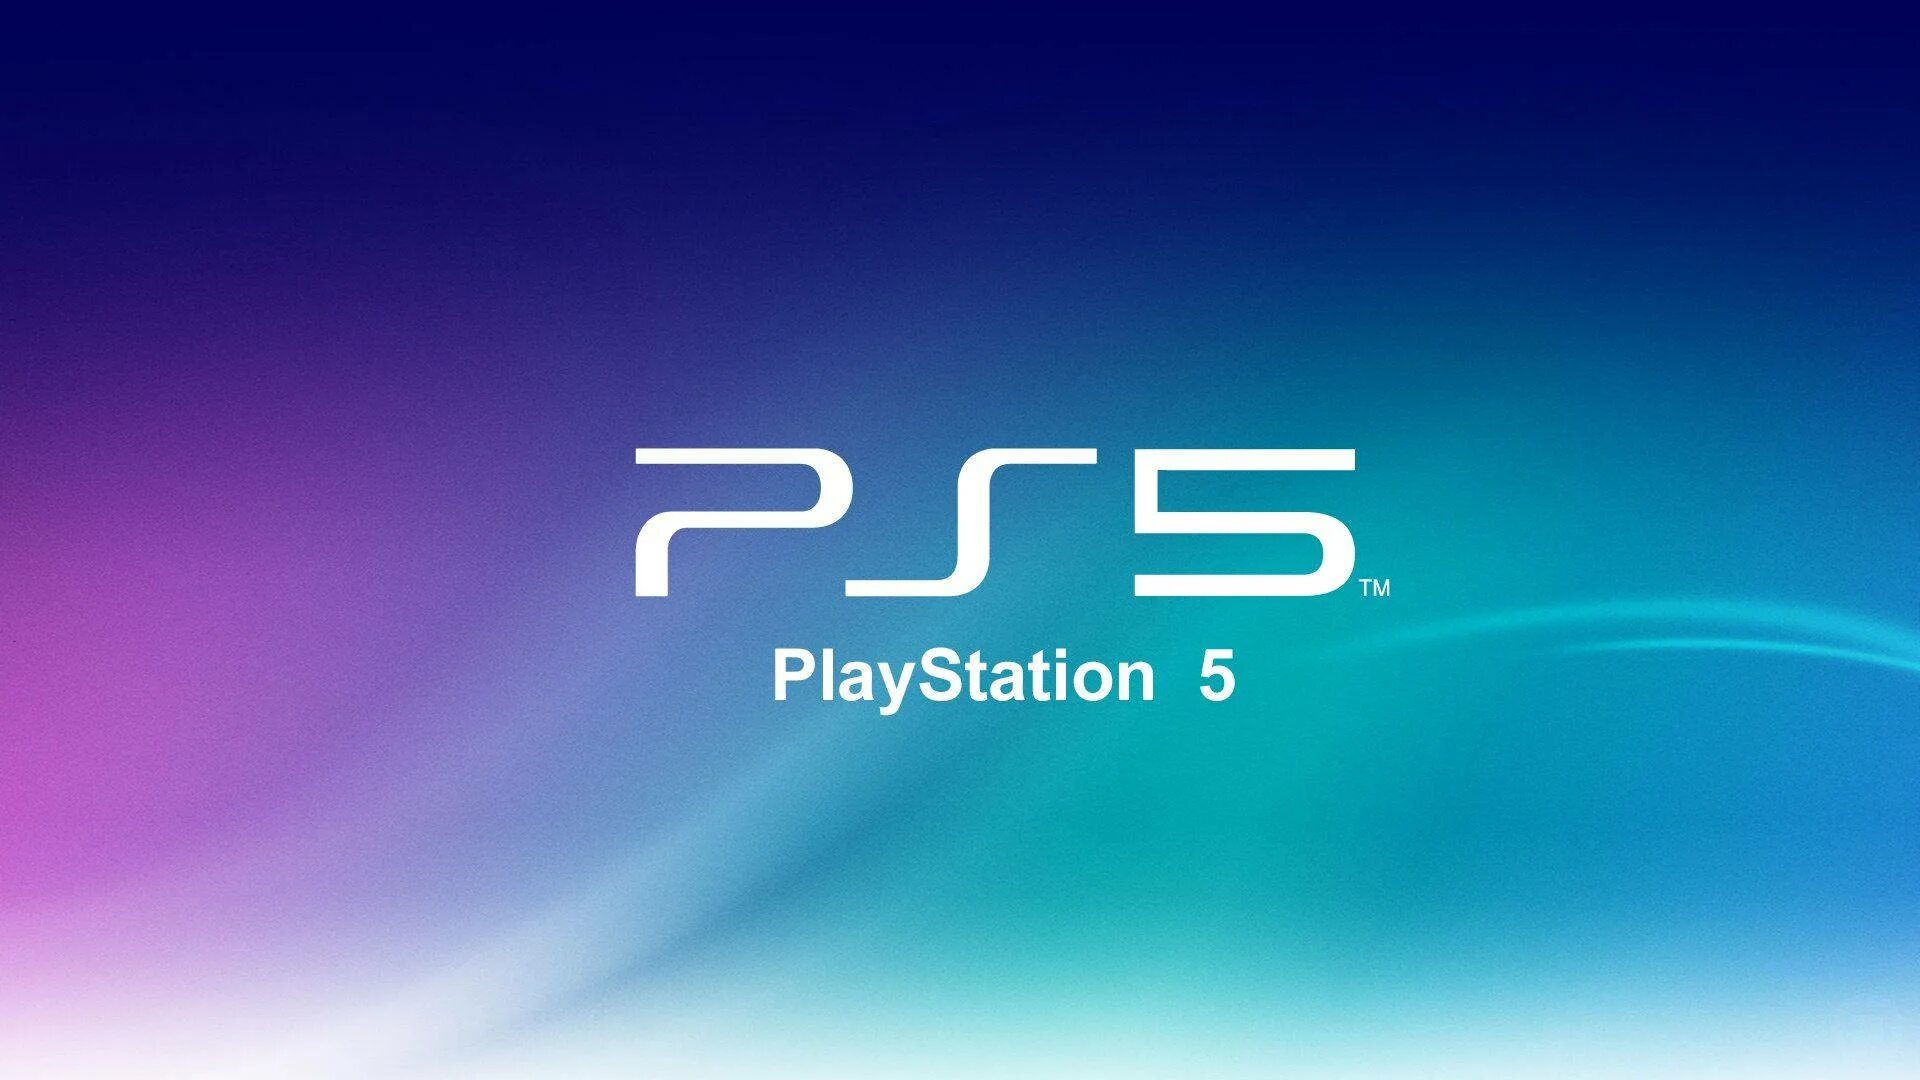 Ps5 девушка. Sony PLAYSTATION 5. Ps5 логотип. PLAYSTATION 5 обои. PLAYSTATION 5 логотип.